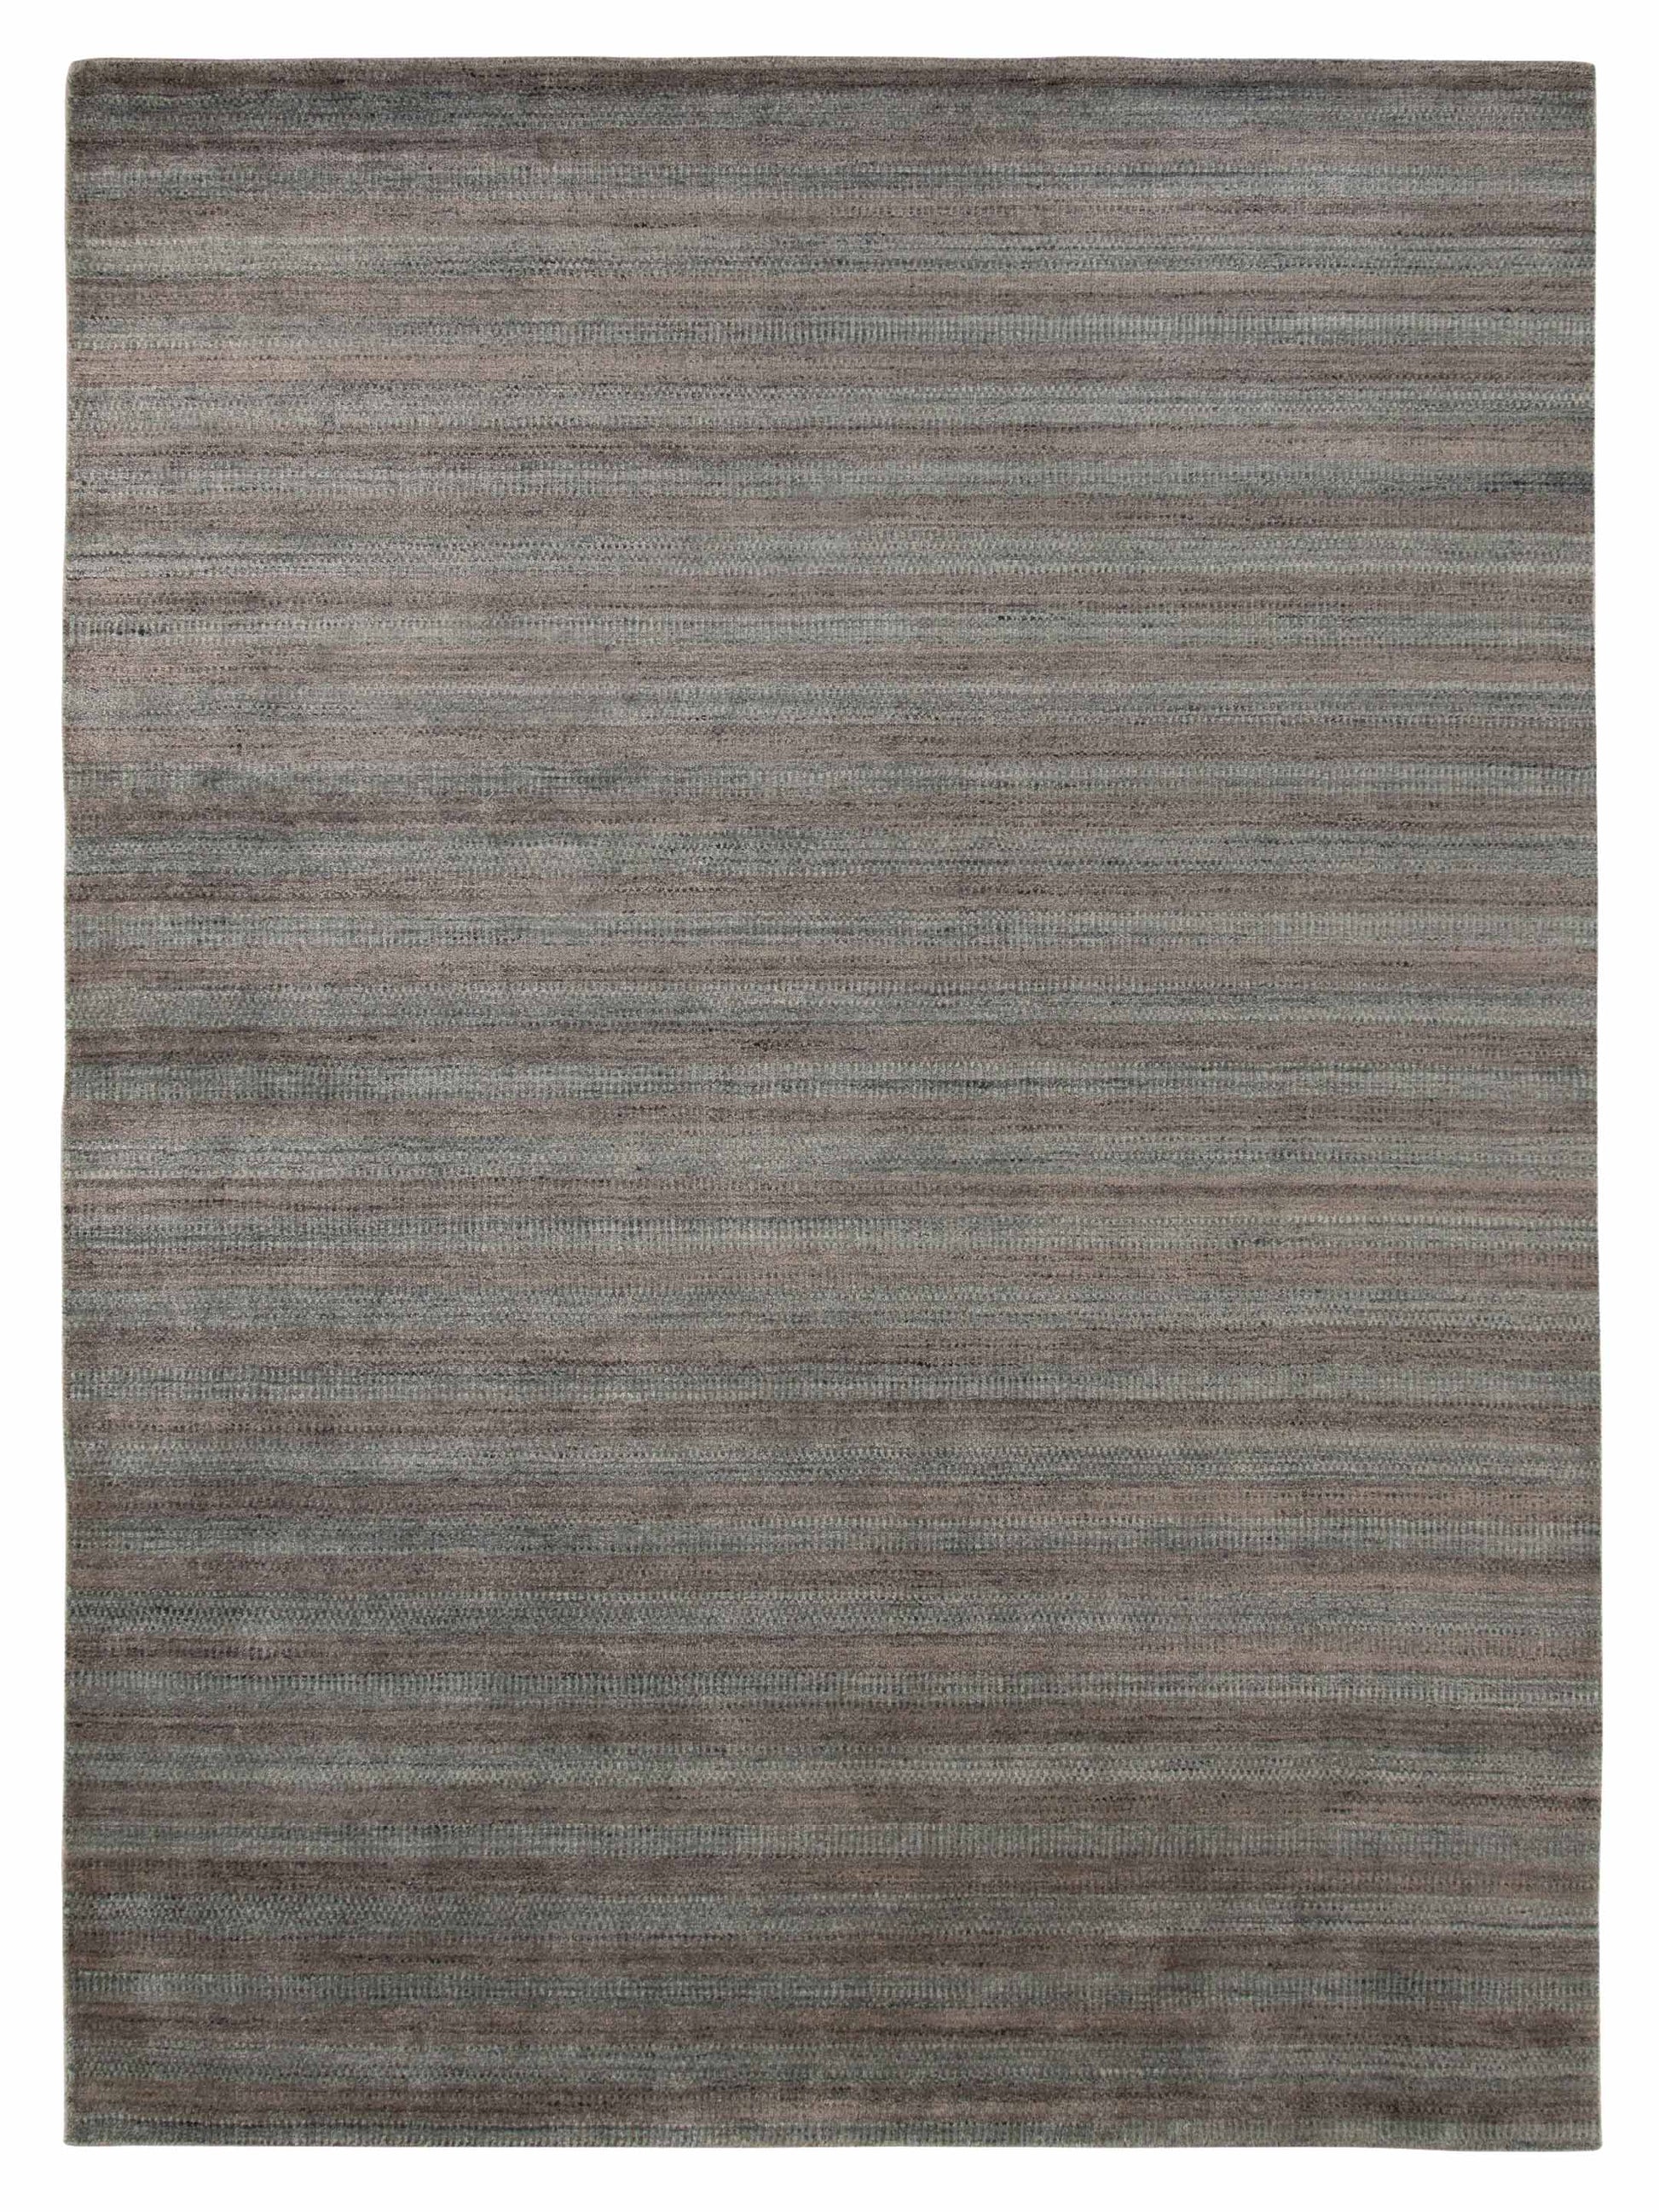 Limited REDCLIFFE RD-805 SILVER Transitional Woven Rug